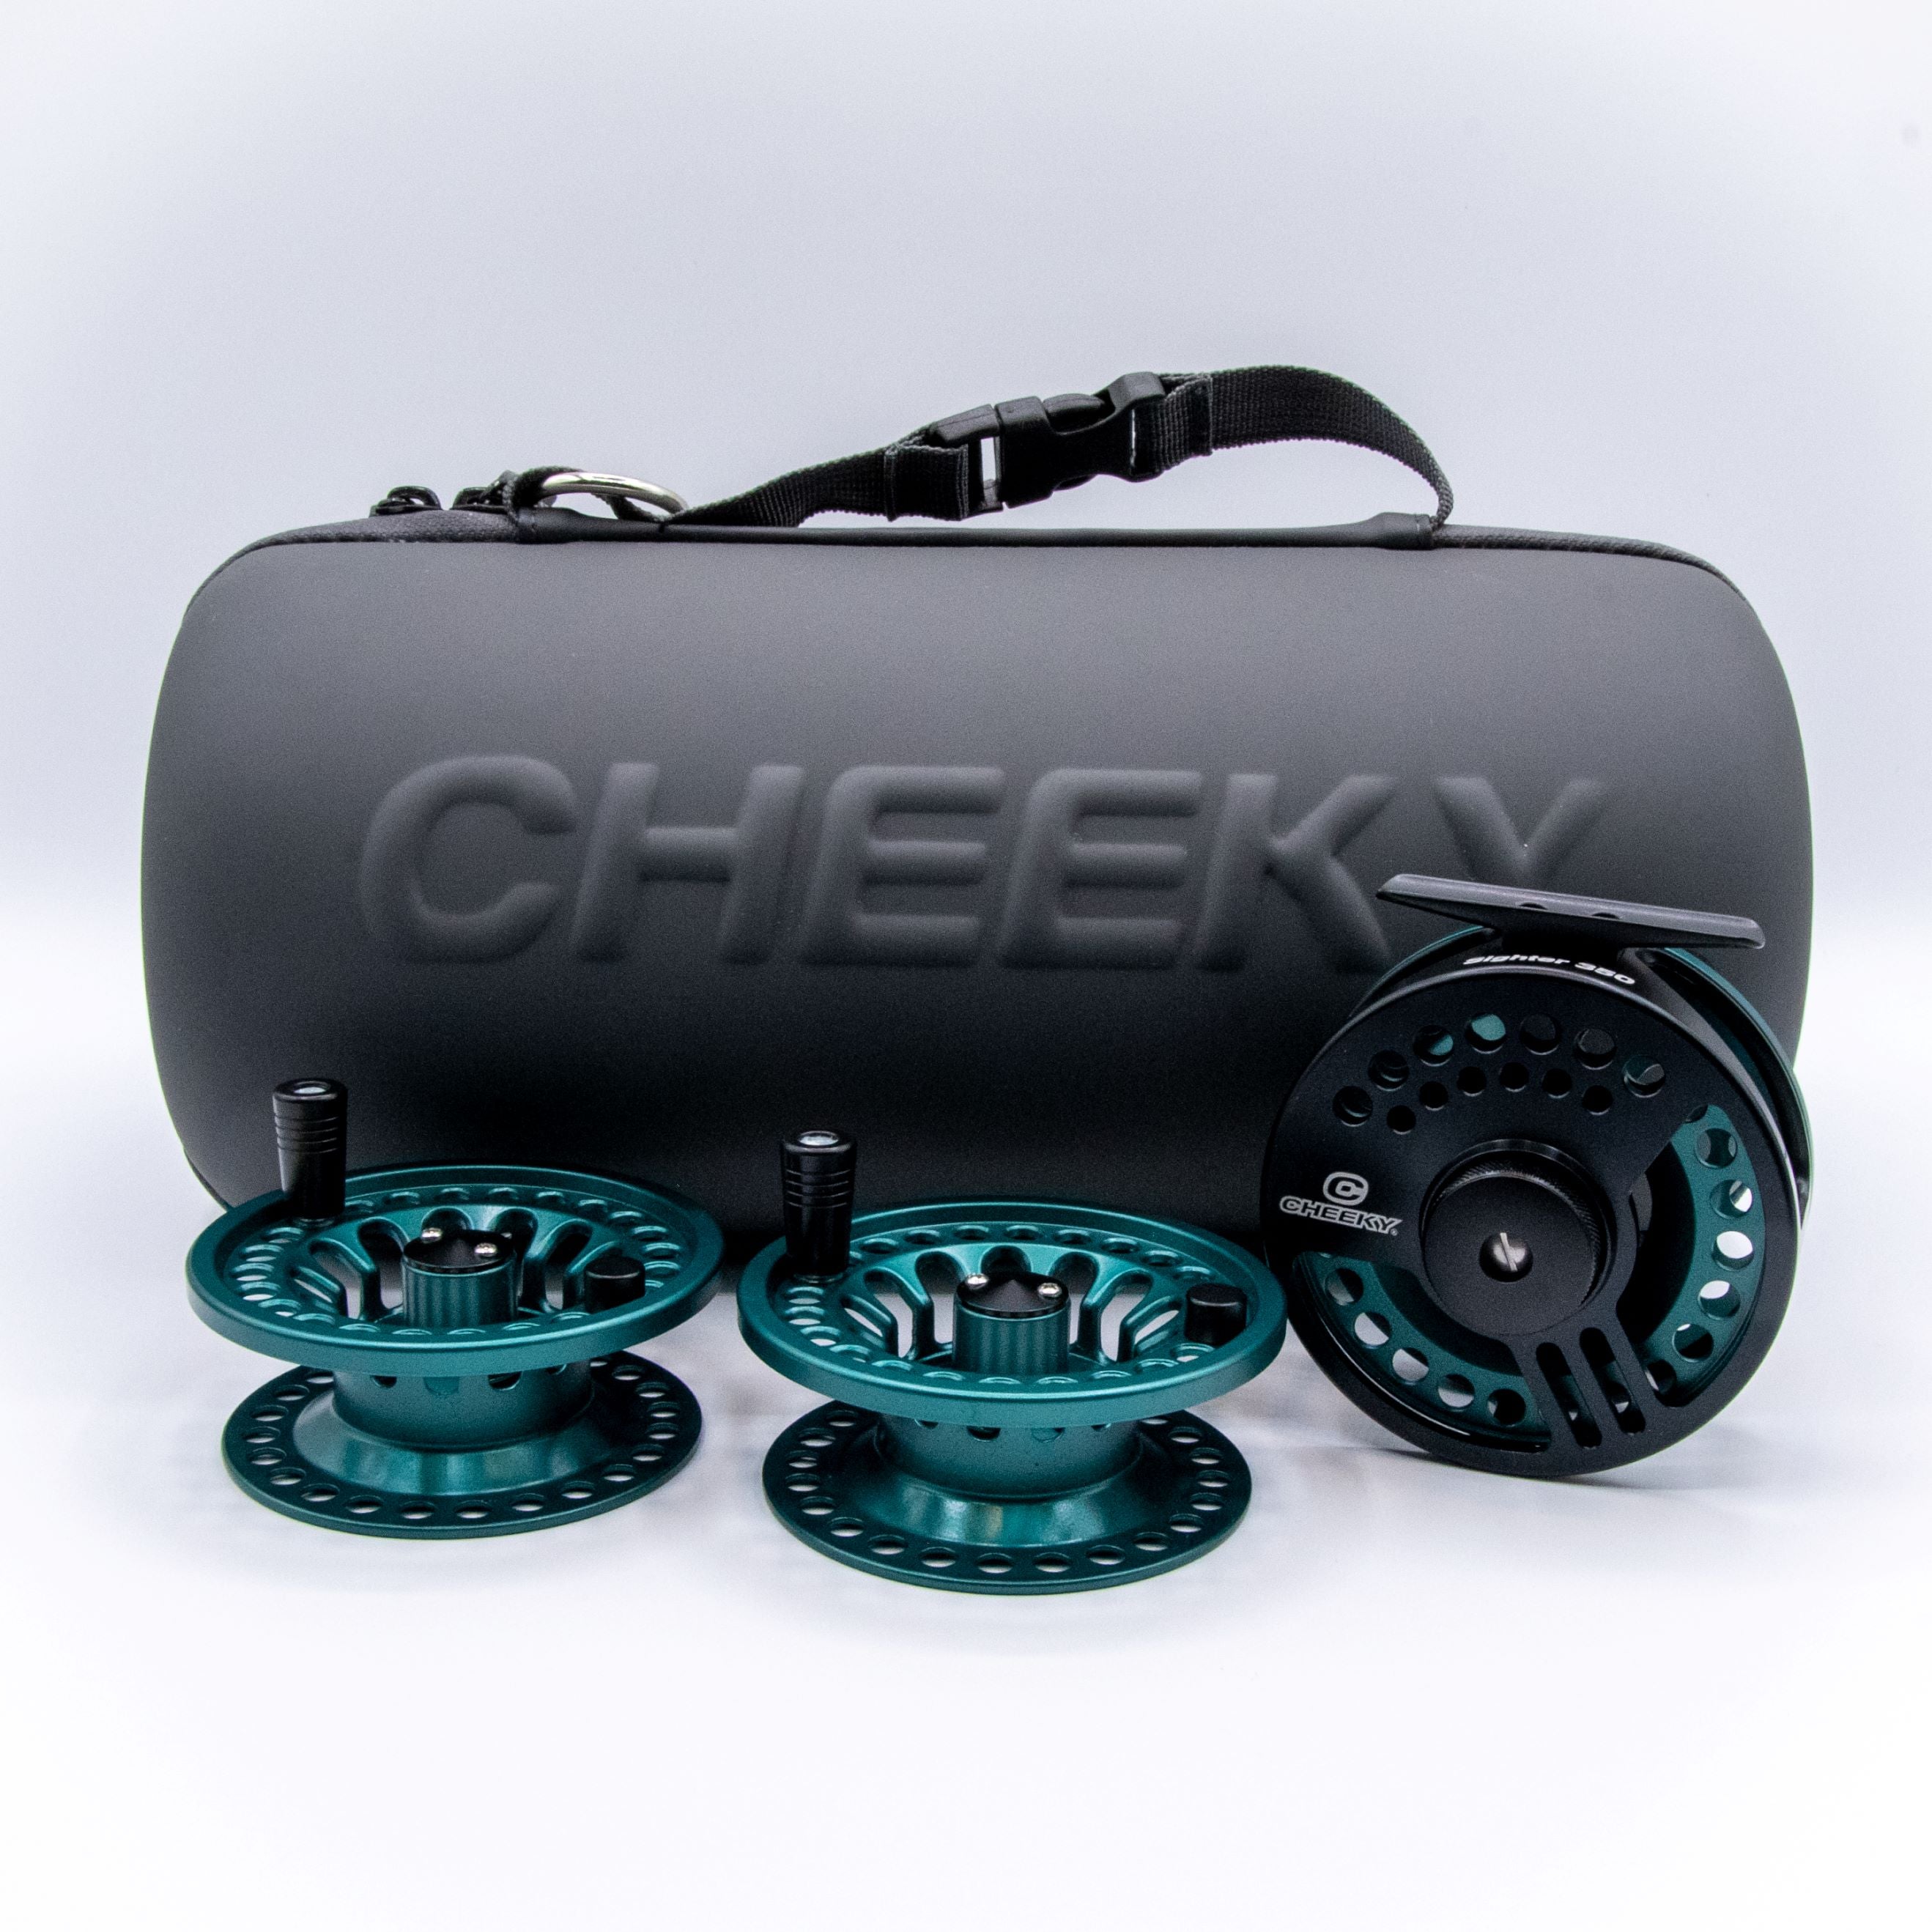  Cheeky Fishing Fly Reel Case, Cheeky Fishing Party